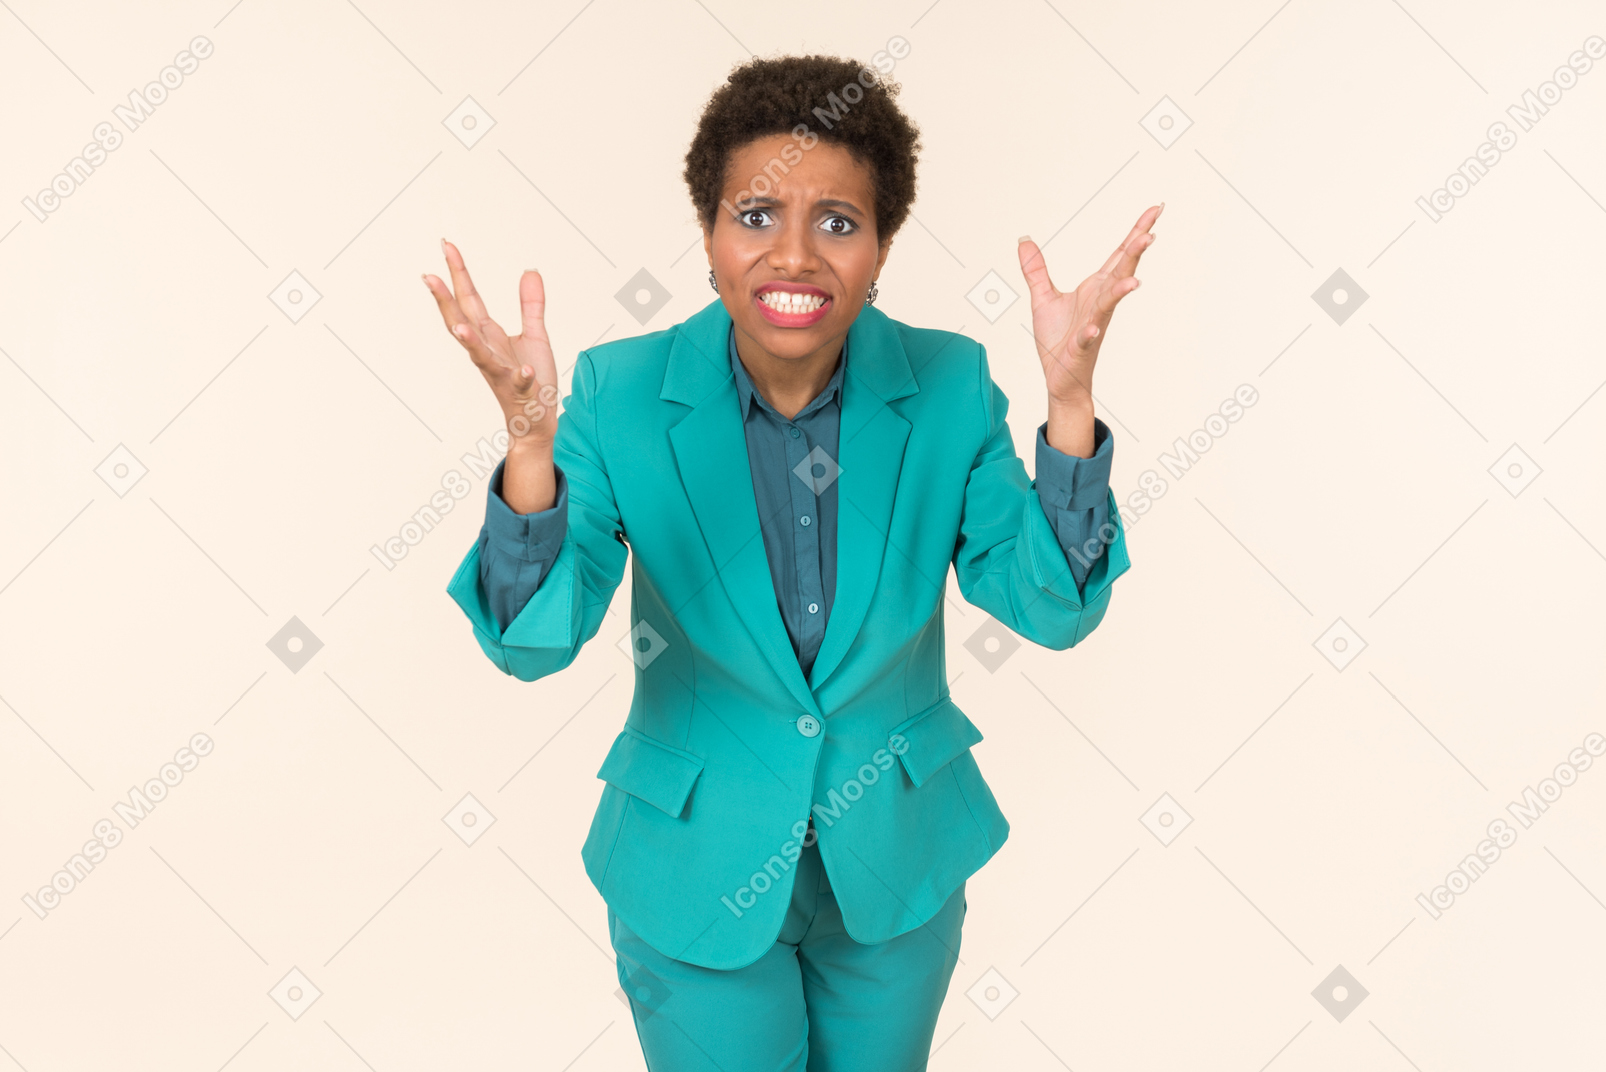 Black woman with a short haircut, wearing all blue, standing against a plain pastel background, looking emotional